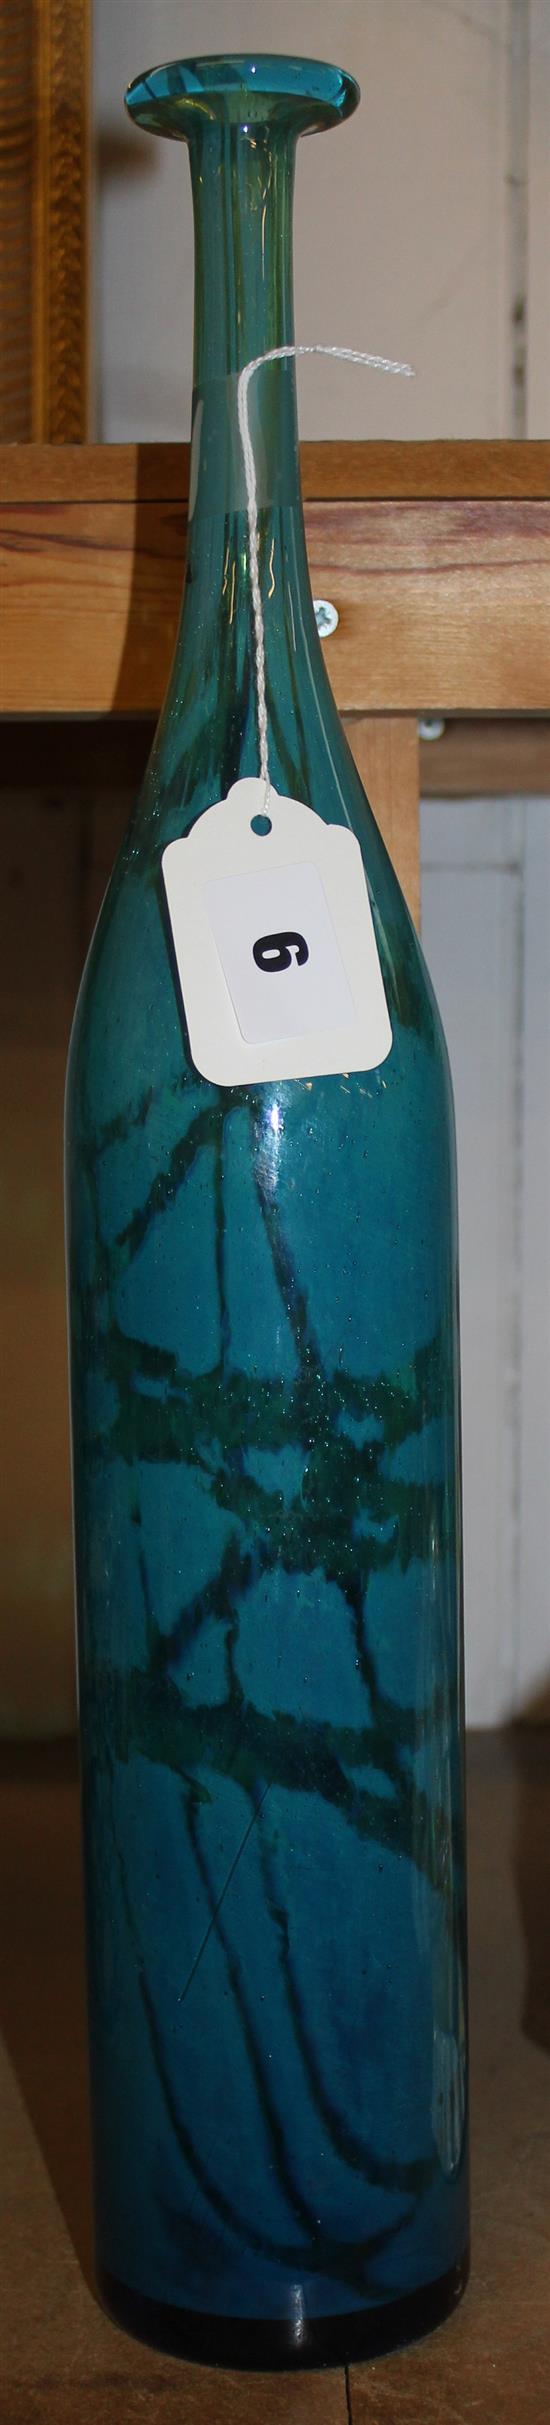 Mdina glass tall bottle vase in variegated blue/green tones